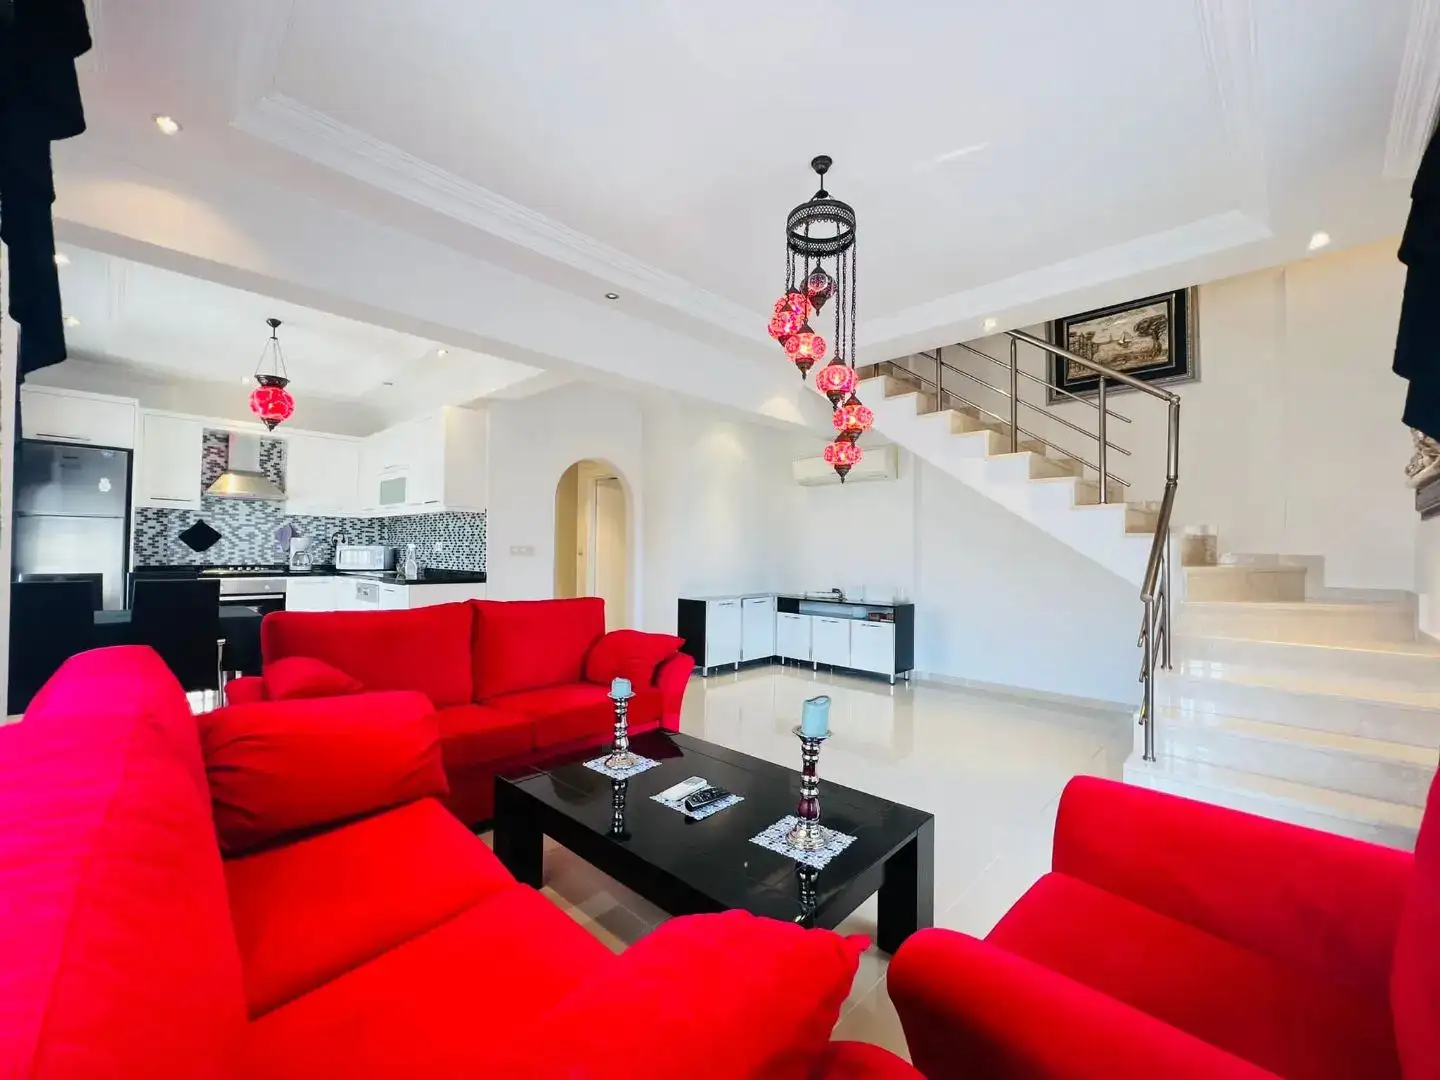 2+1 DUPLEX FOR SALE İN THE BEST LOCATİON OF ALANYA